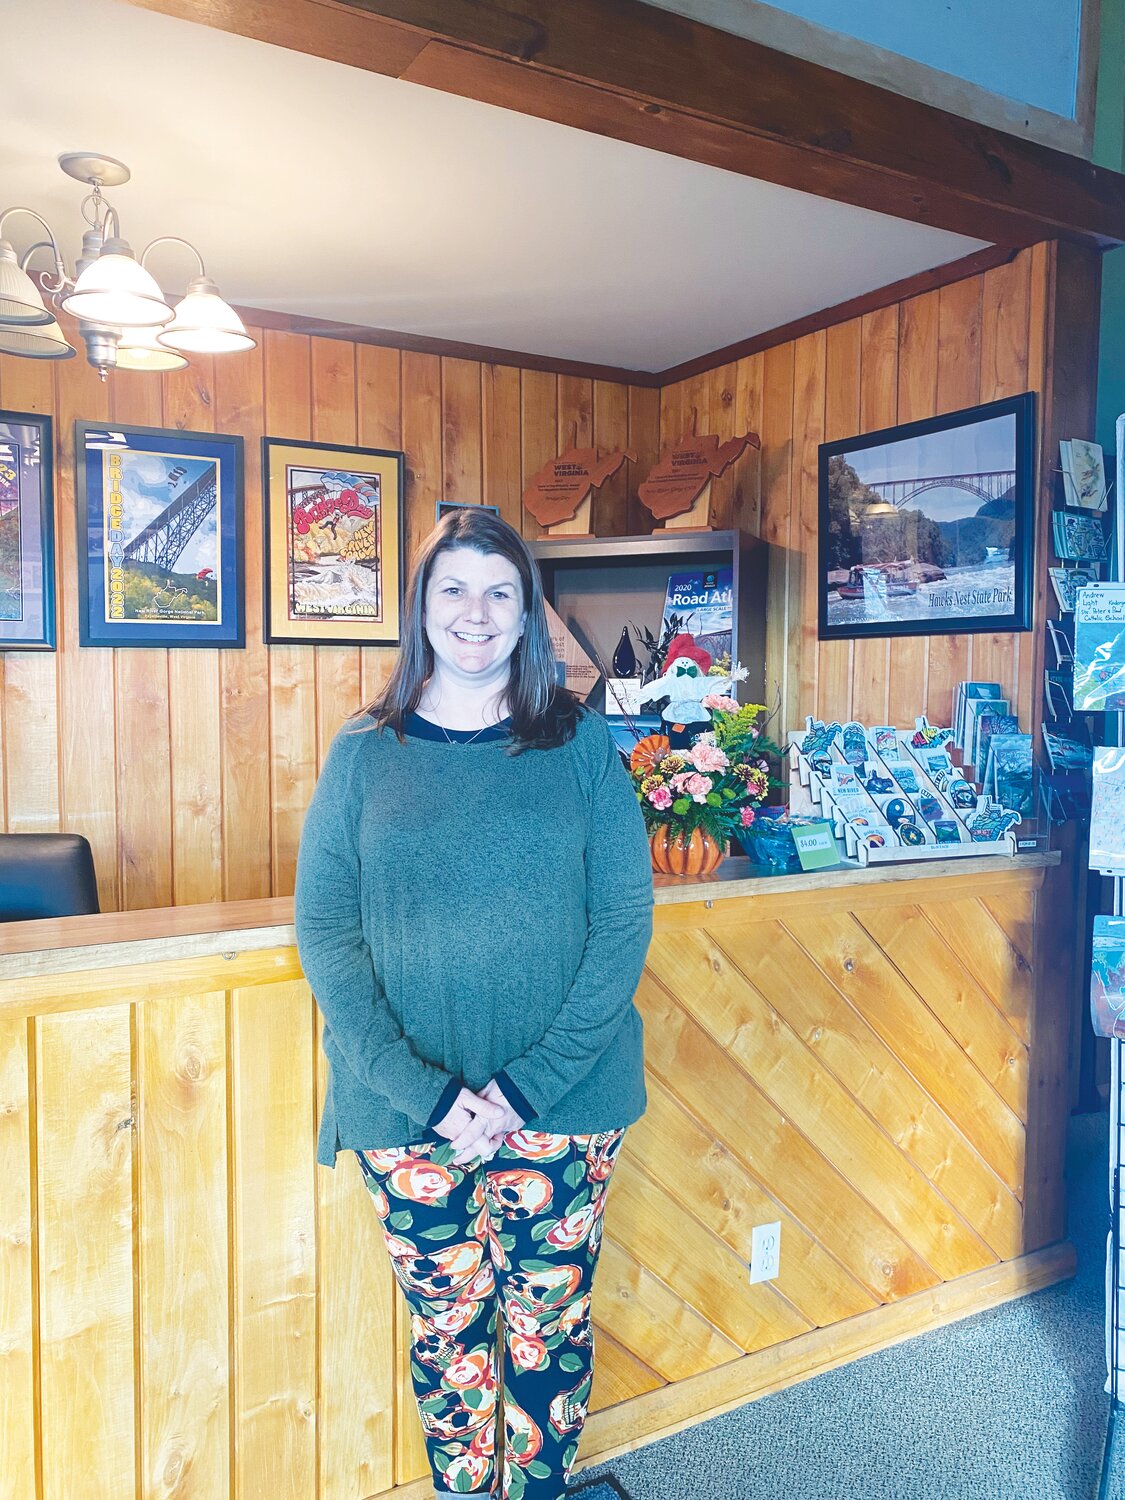 Becky Sullivan, director of the New River Gorge Convention and Visitors Bureau, said people living in Fayetteville can still enjoy the river on weekends despite an increase in tourists. “You just have to know where to go.”